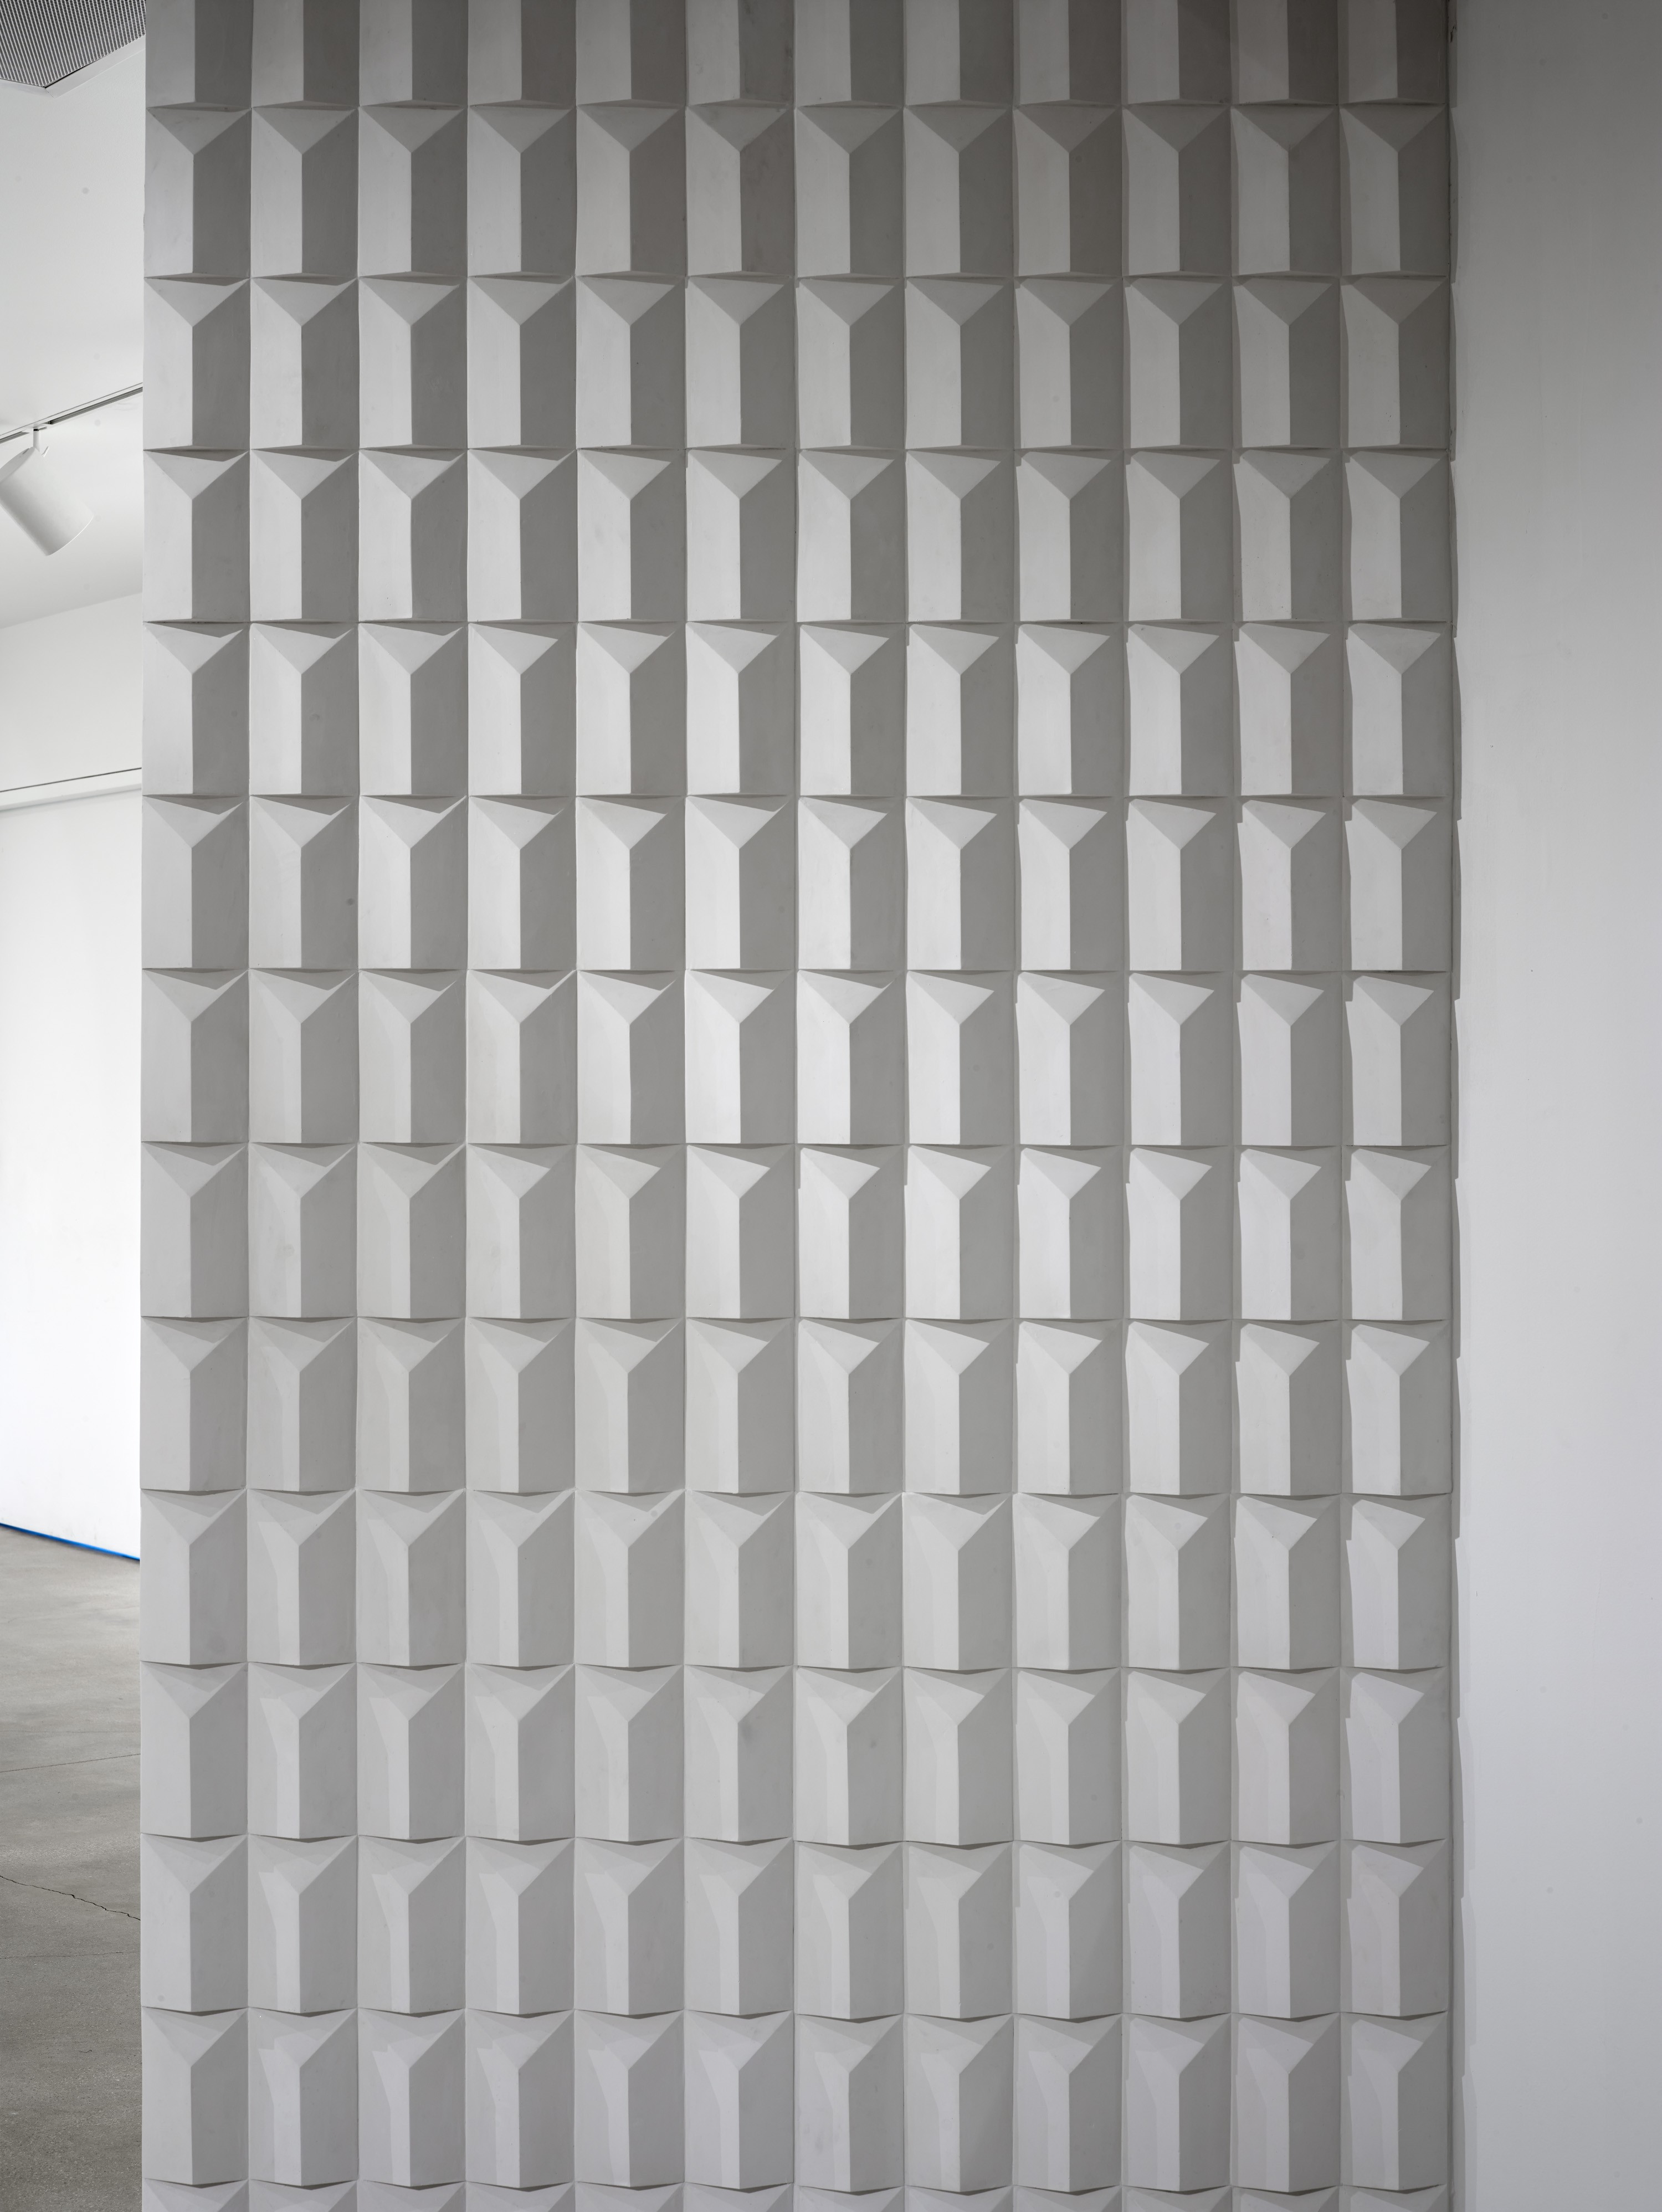 'Wall', 2014. Plaster on wooden structure. Size: 120 x 60 x 2 in.